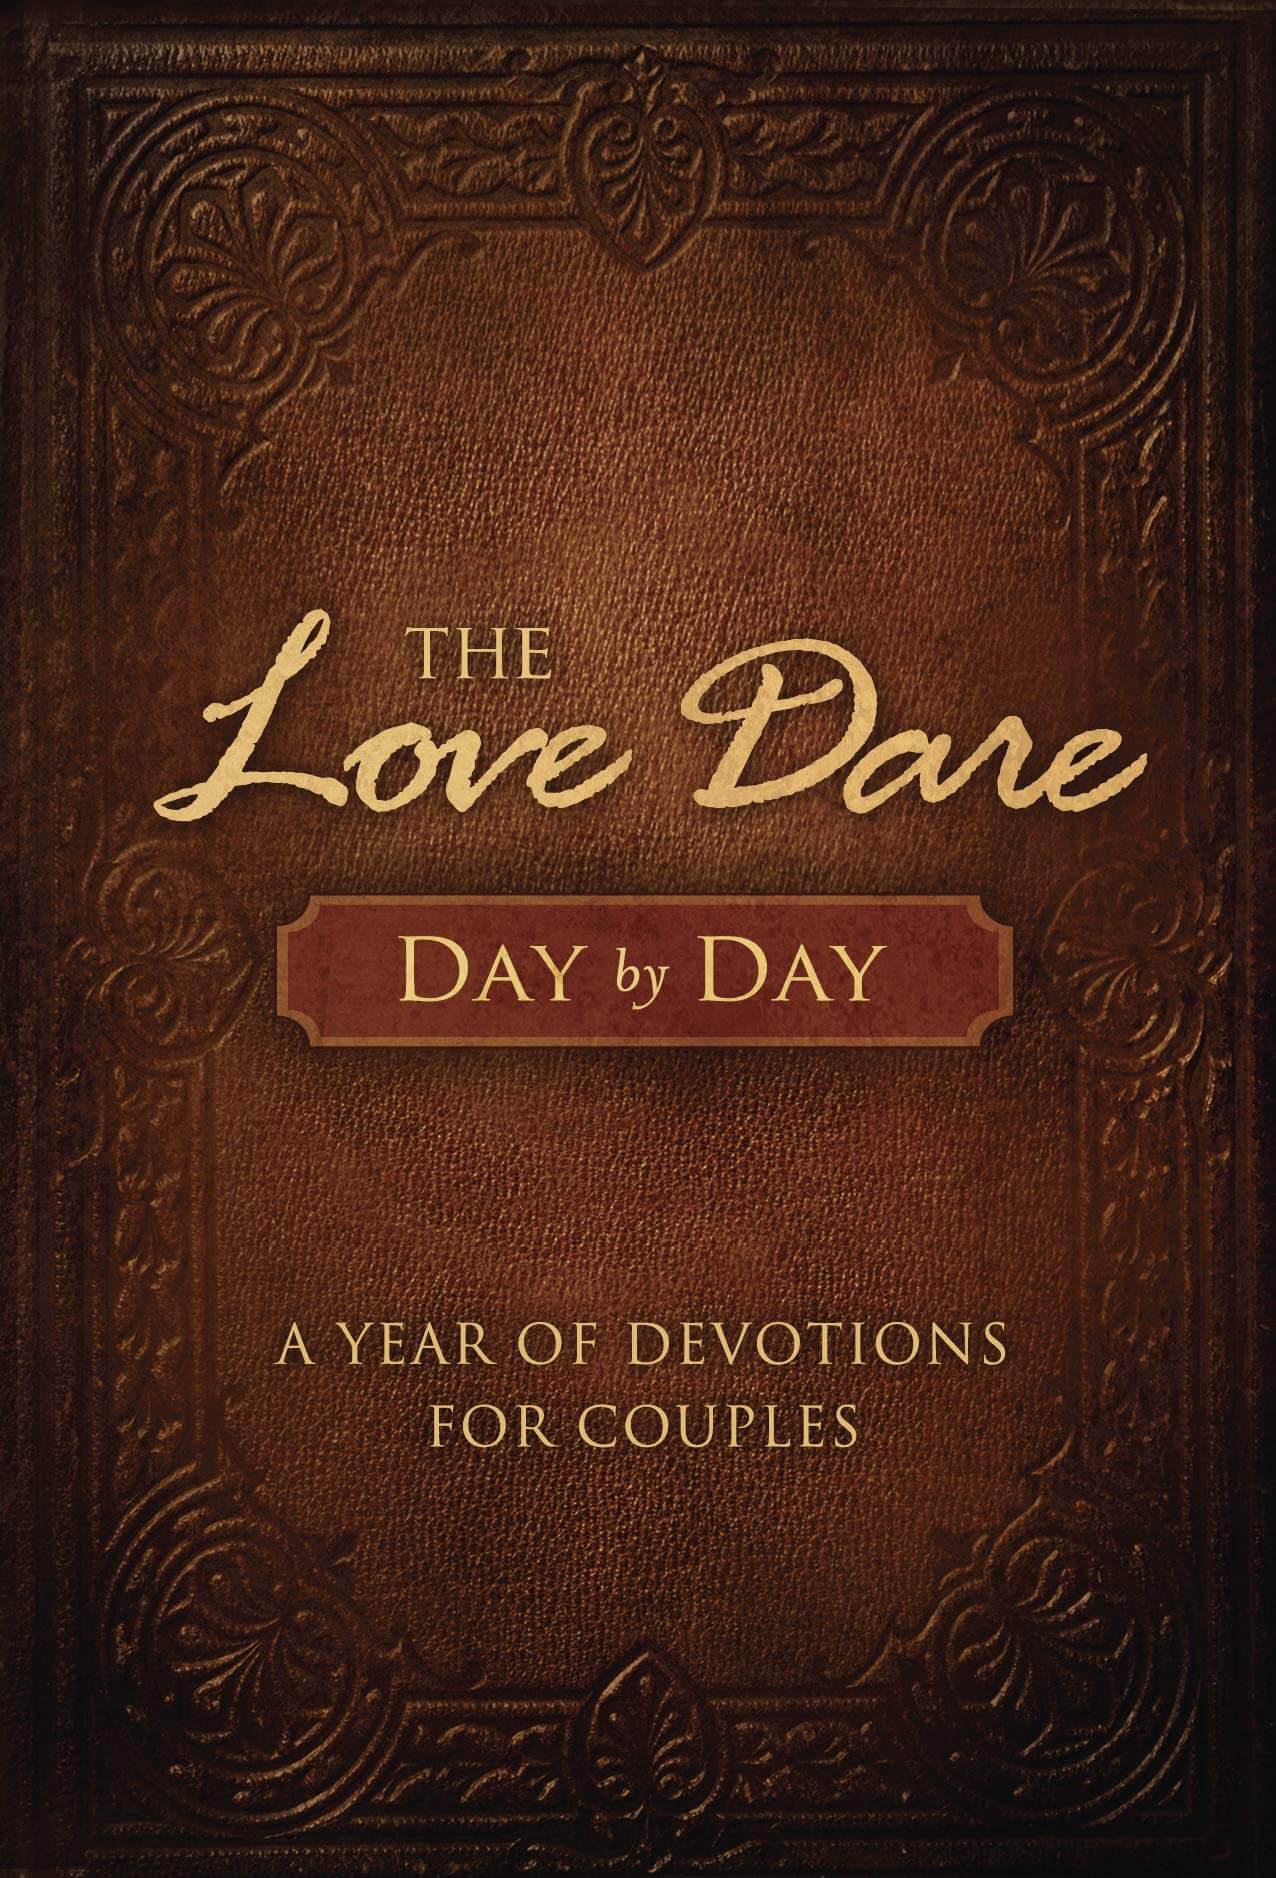 The-Love-Dare-Day-by-Day-A-Year-of-Devotions-for-Couples